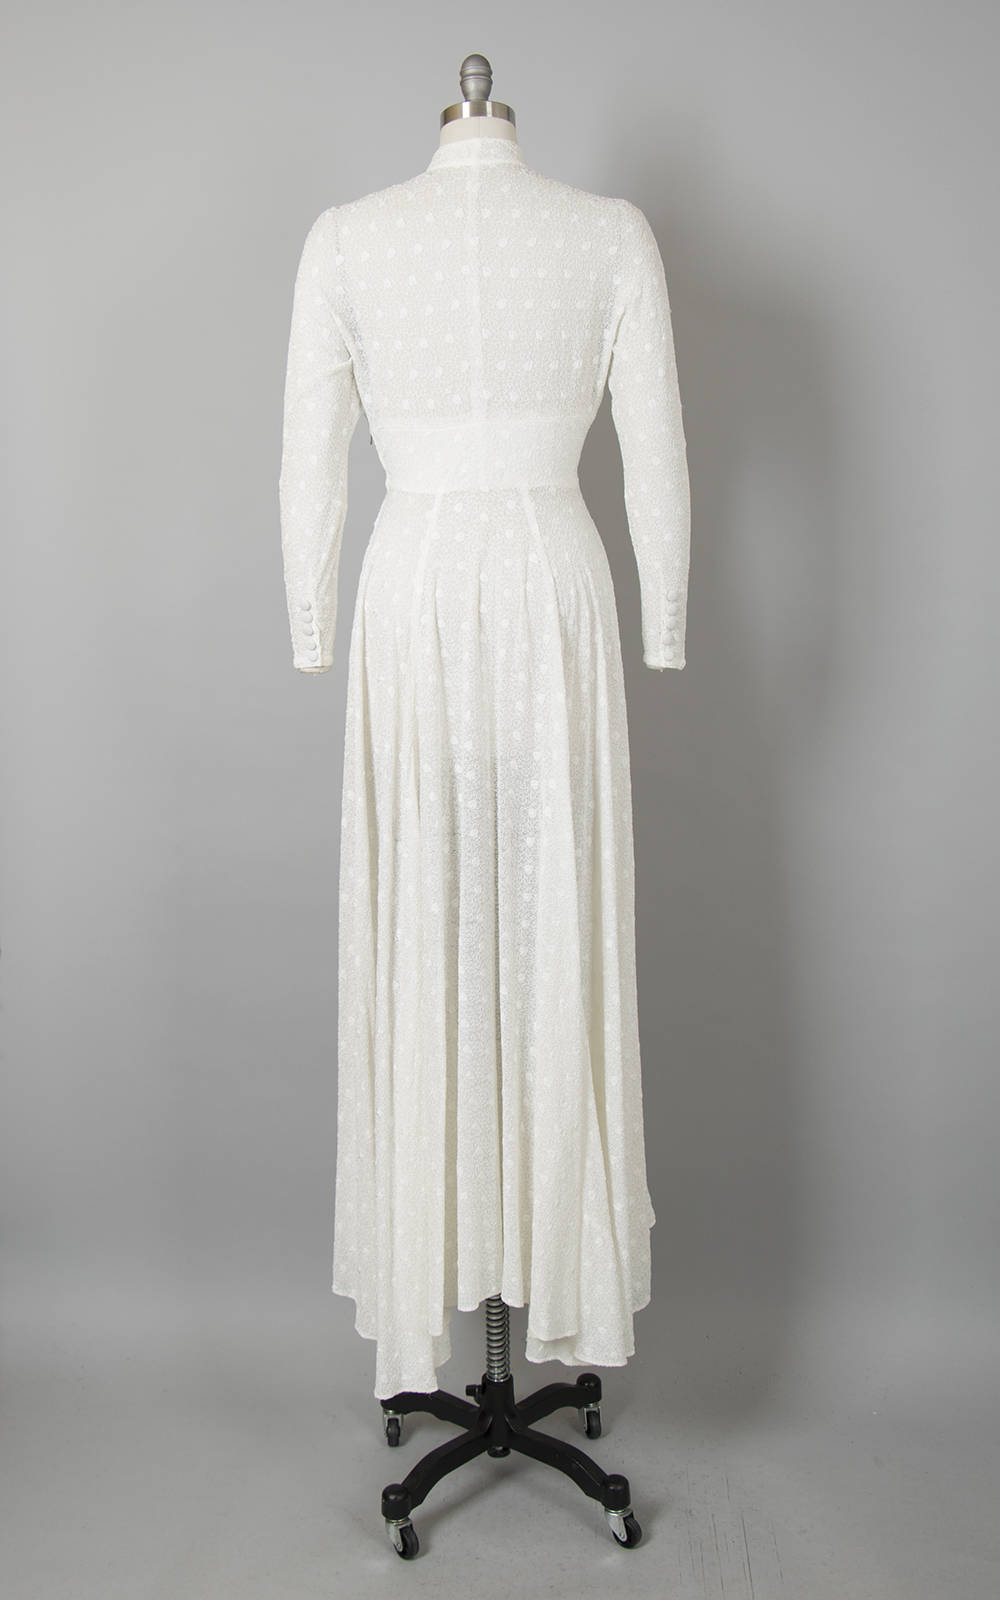 Vintage 1930s 1940s Wedding Dress 30s 40s Sheer White Chiffon Soutache Heart Embroidered Full Length Long Sleeve Bridal Gown (small/medium)